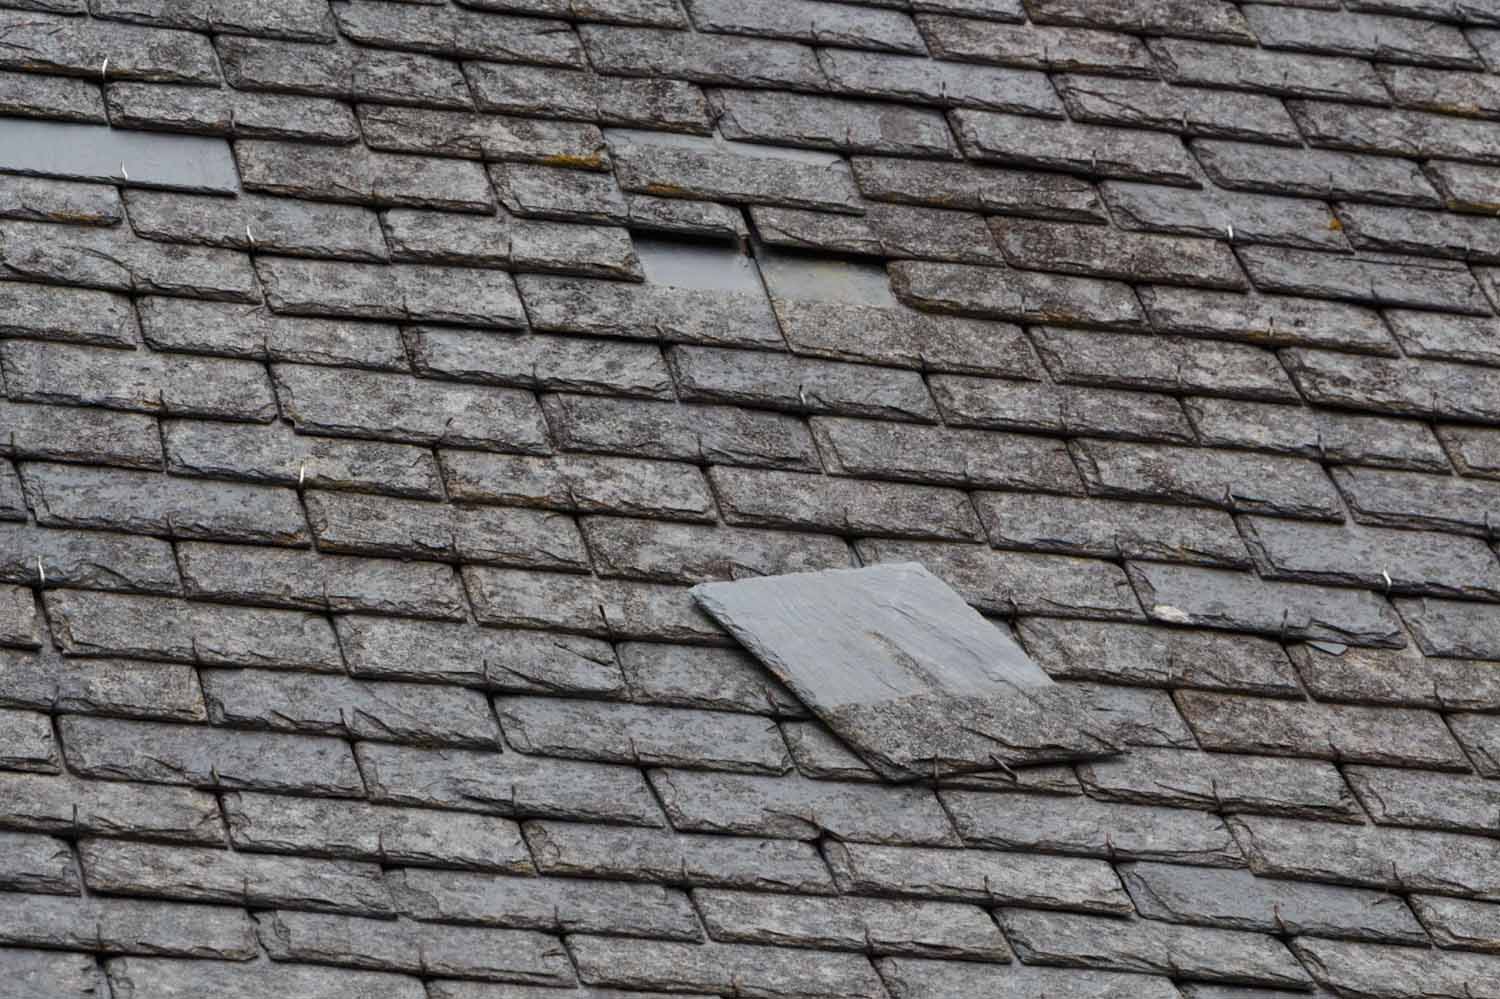 Slate roof tile detached from the roof of a house